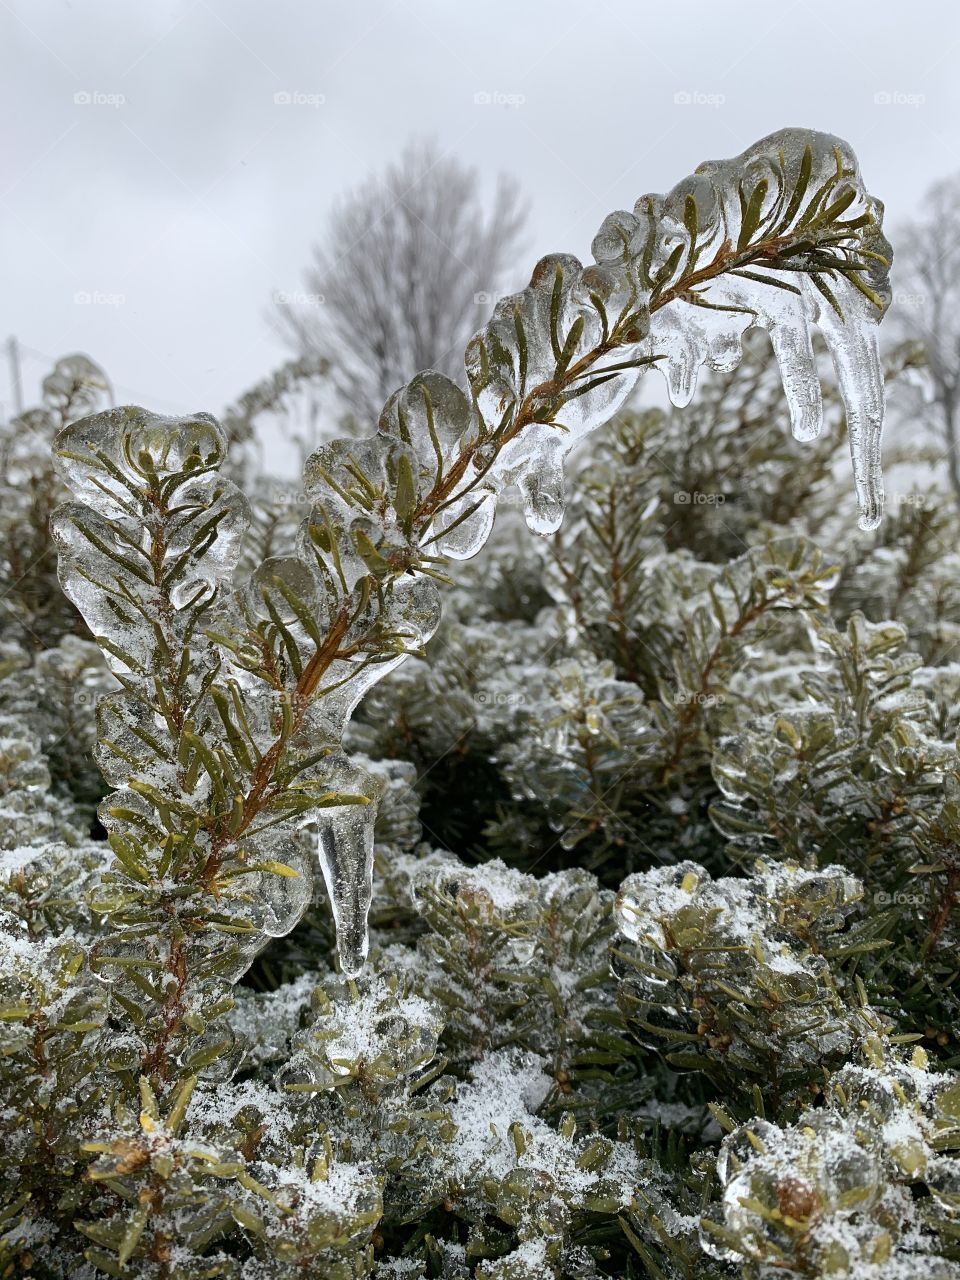 Ice storm in Illinois. Icy bushes